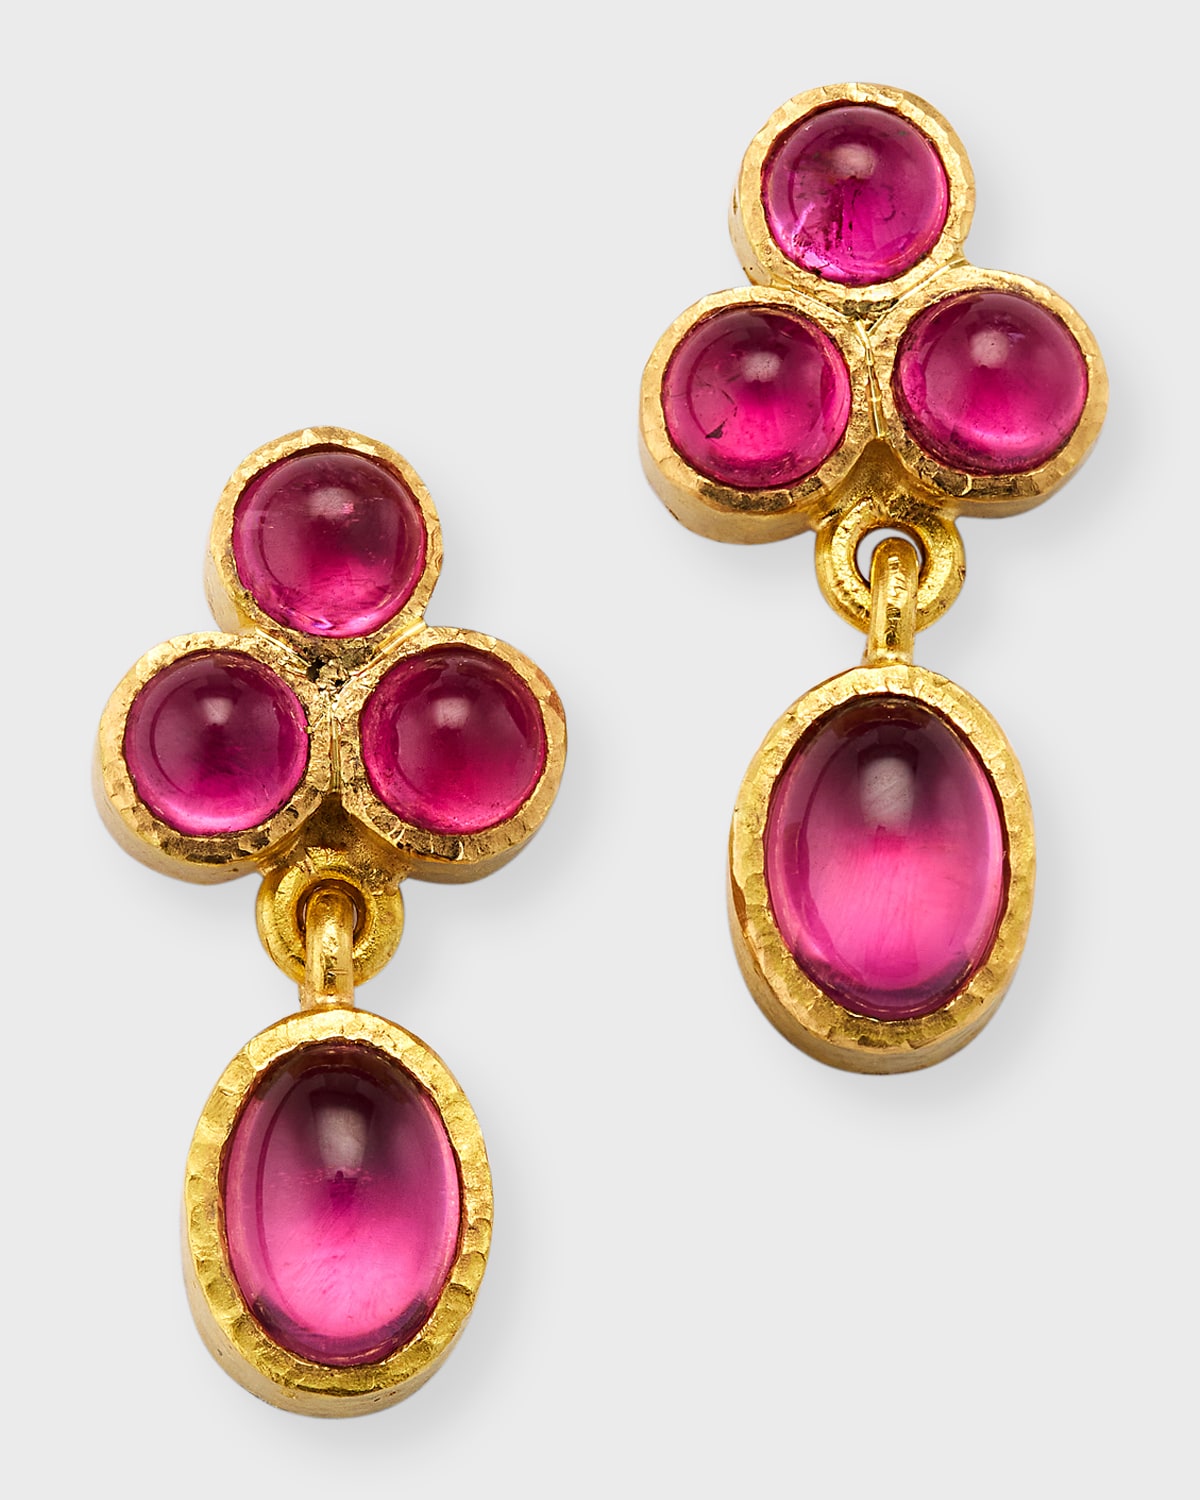 19K Round Pink Tourmaline and Oval Drop Earrings